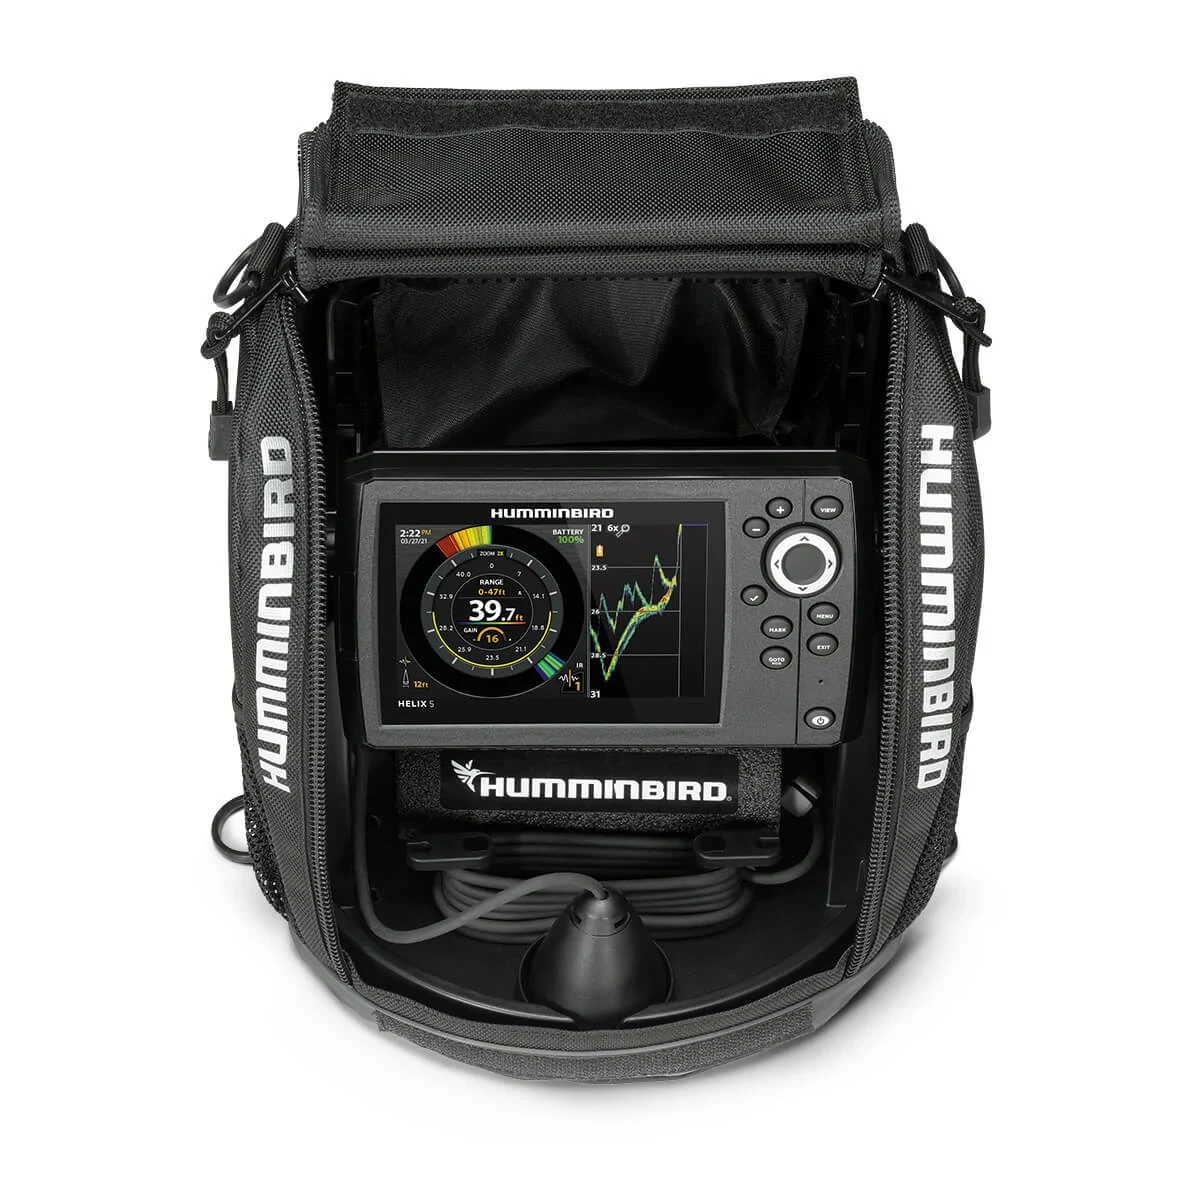 ICE HELIX 5 CHIRP GPS G3 All Season shown from top angle with the transducer tucked into the built-in tray in the shuttle